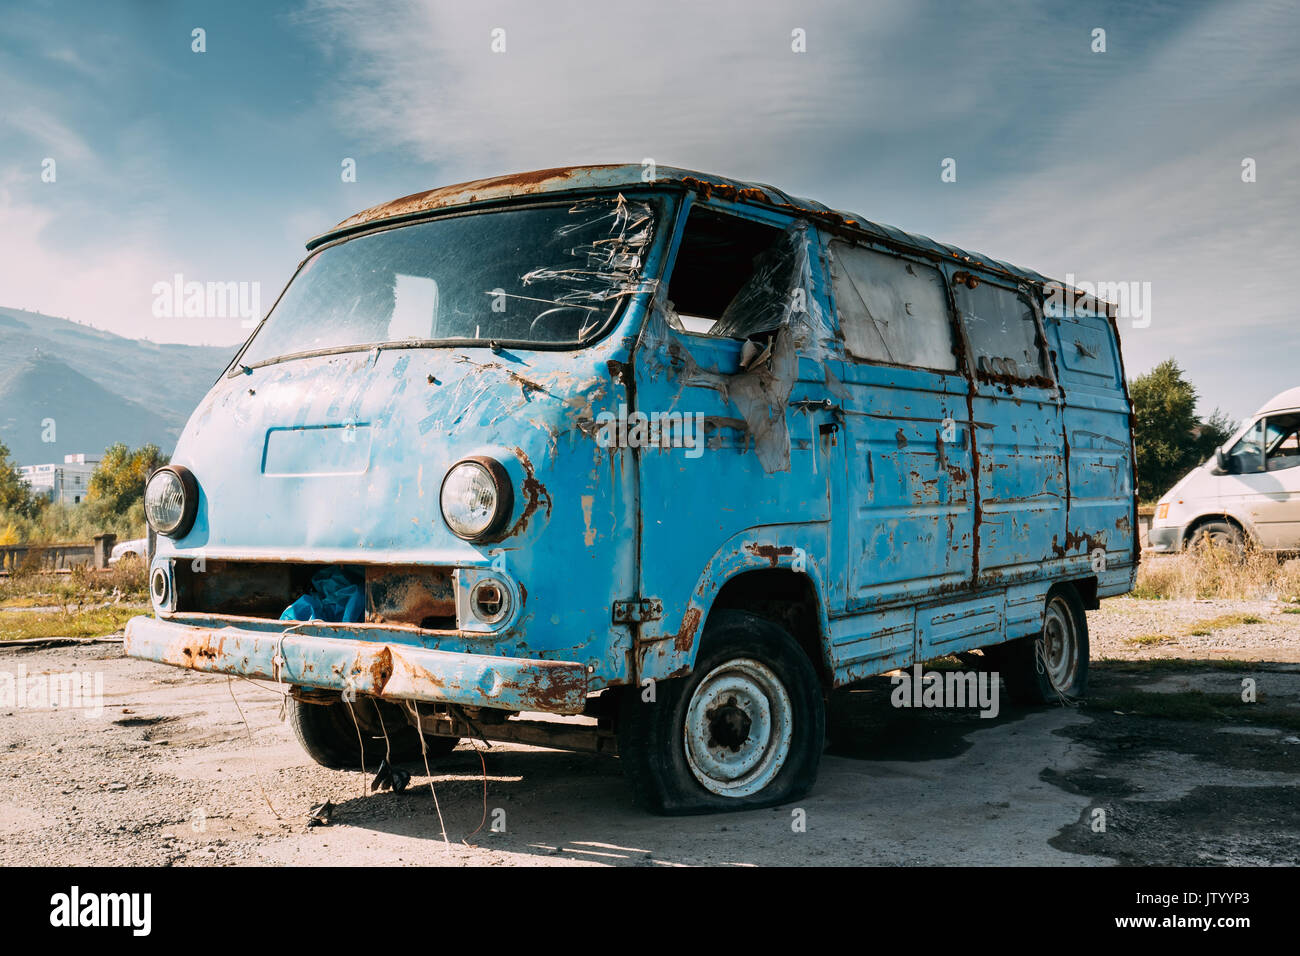 Old Broken Abandoned Mini Bus Car Vehicle In Countryside. Car Wreck Stock Photo